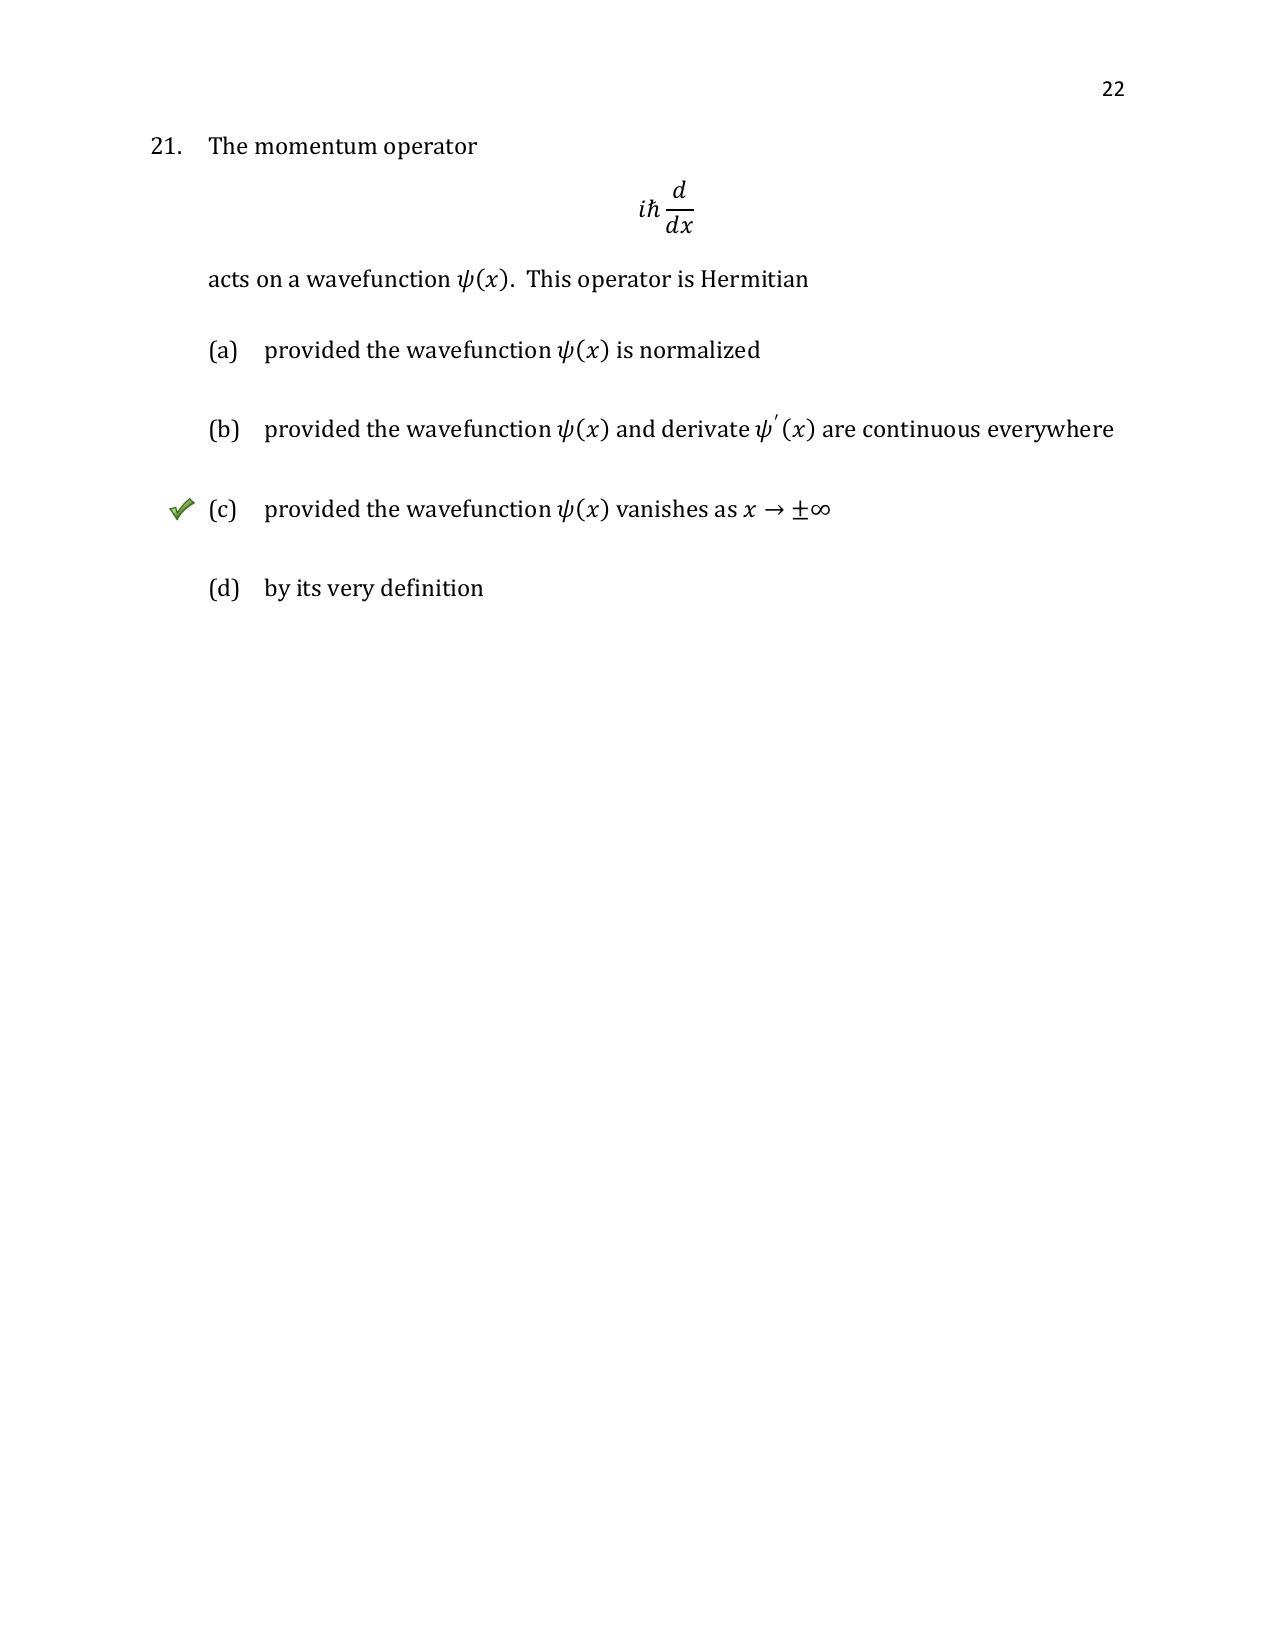 TIFR GS 2020 Physics Question Paper - Page 23